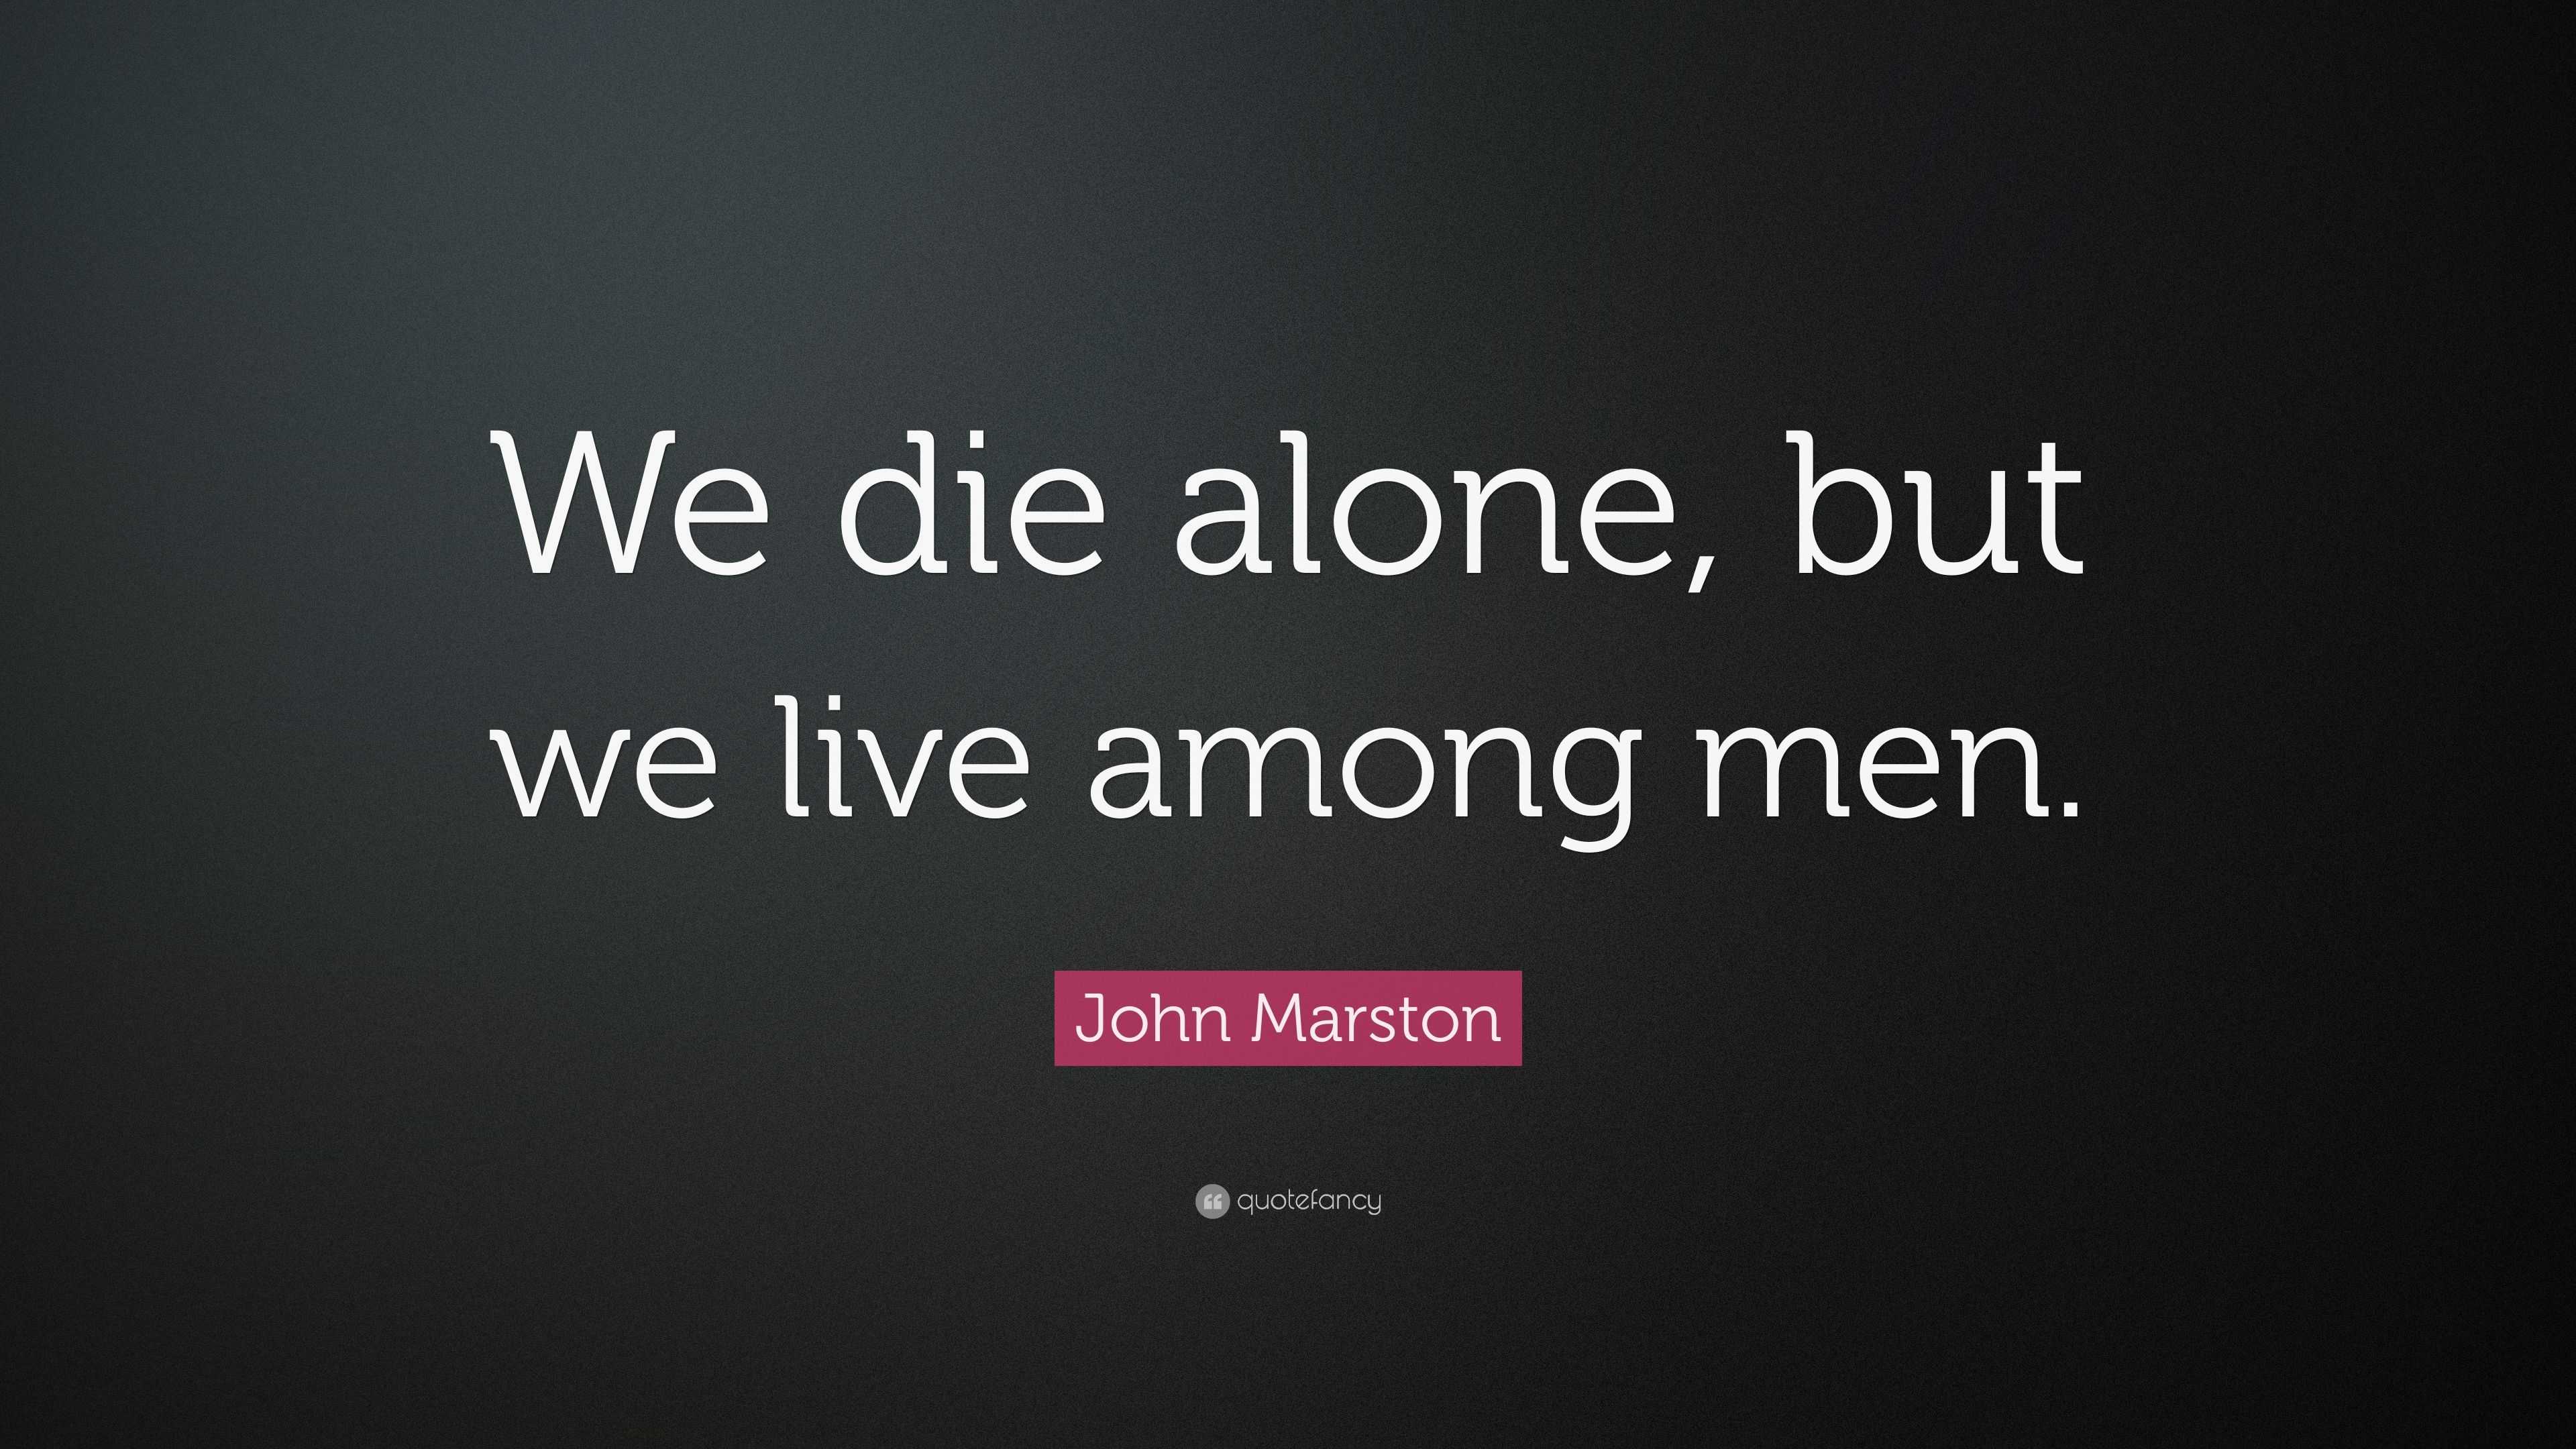 John Marston Quote: "We die alone, but we live among men."